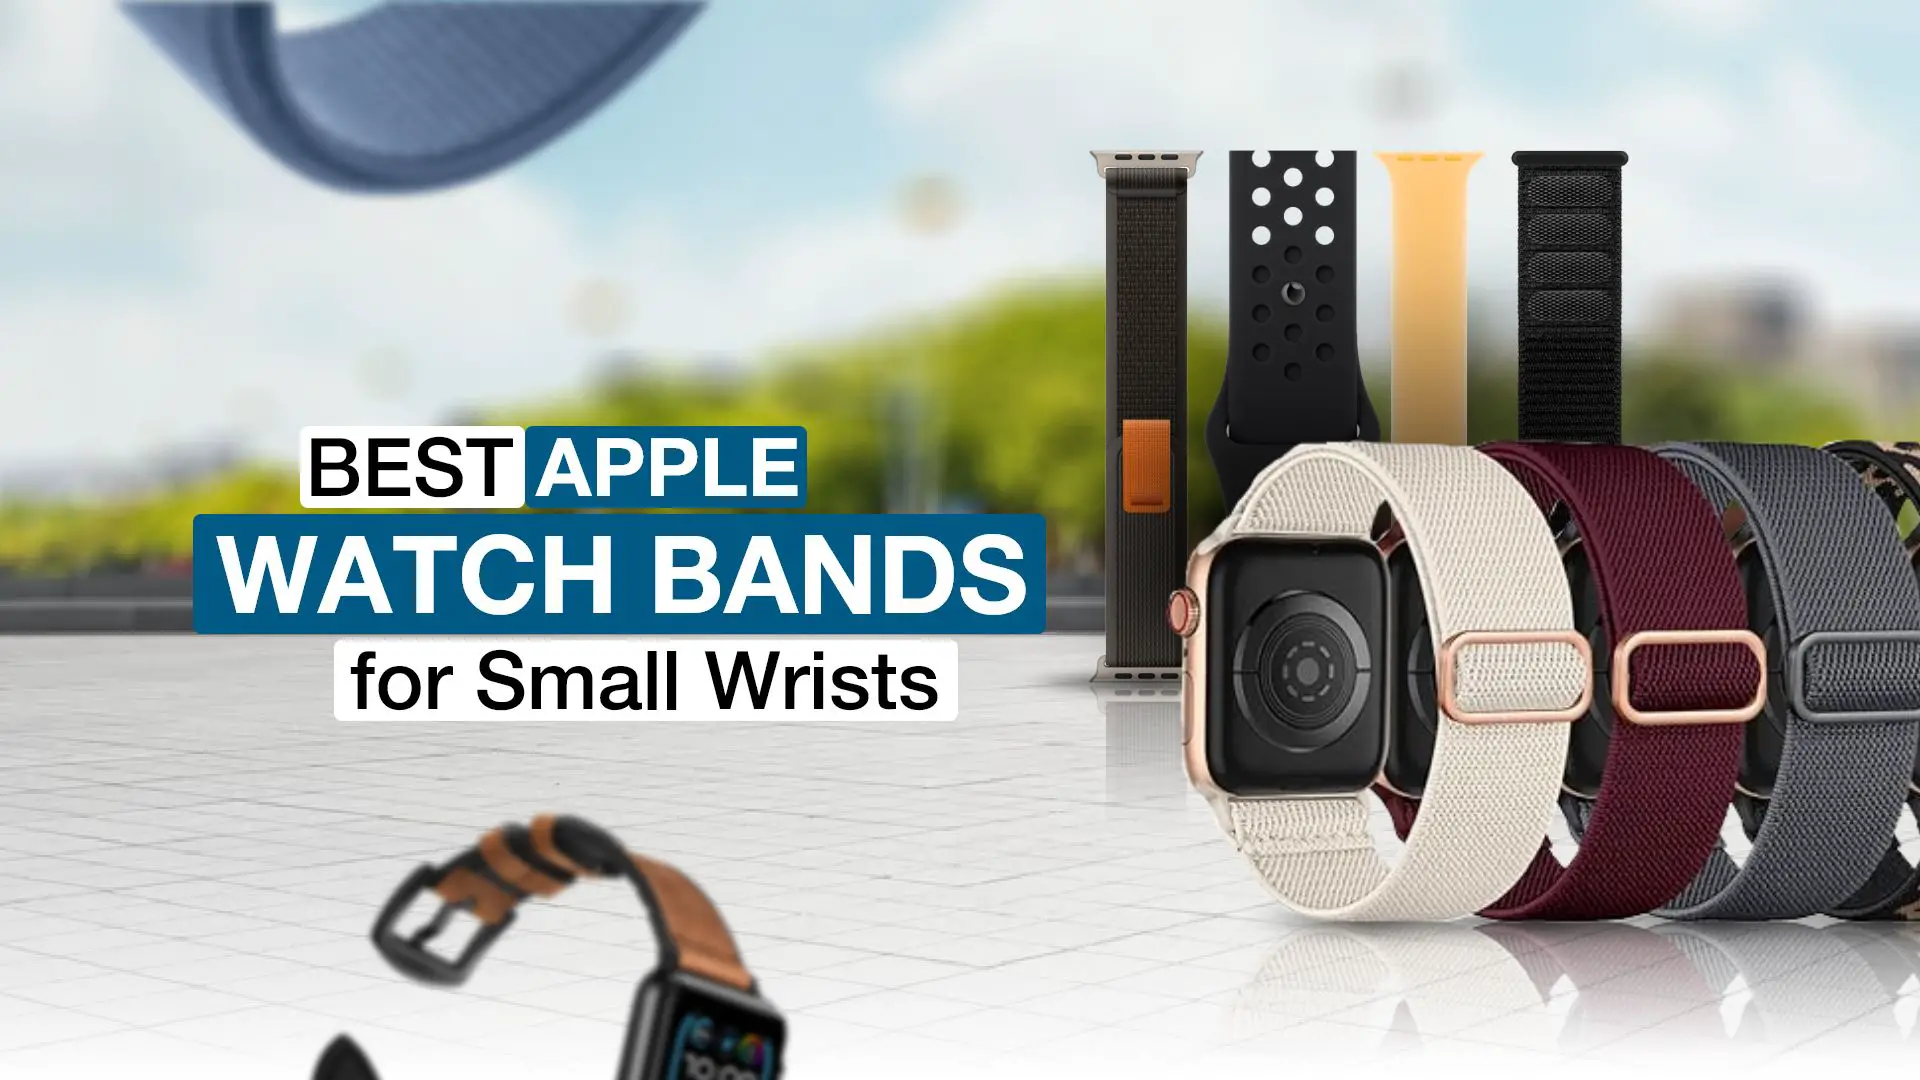 Apple watch bands for small wrists